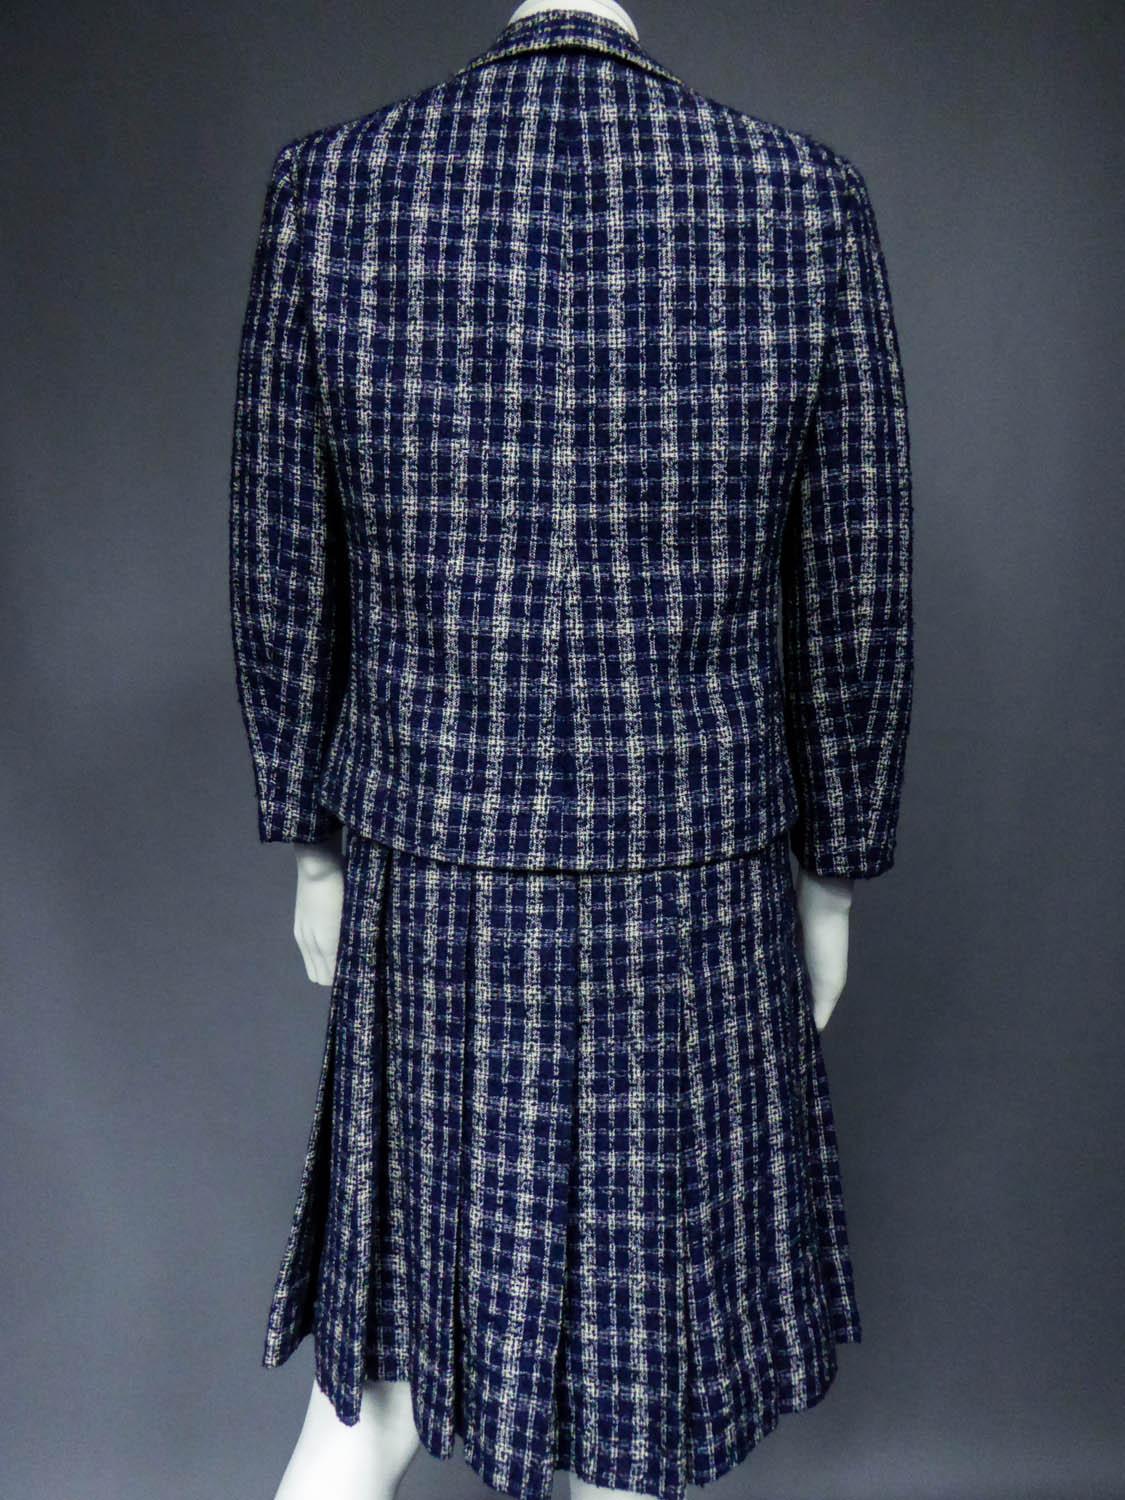 Christian Dior Demi Couture Skirt Suit Set -  numbered 46475 Circa 1962-1965 8